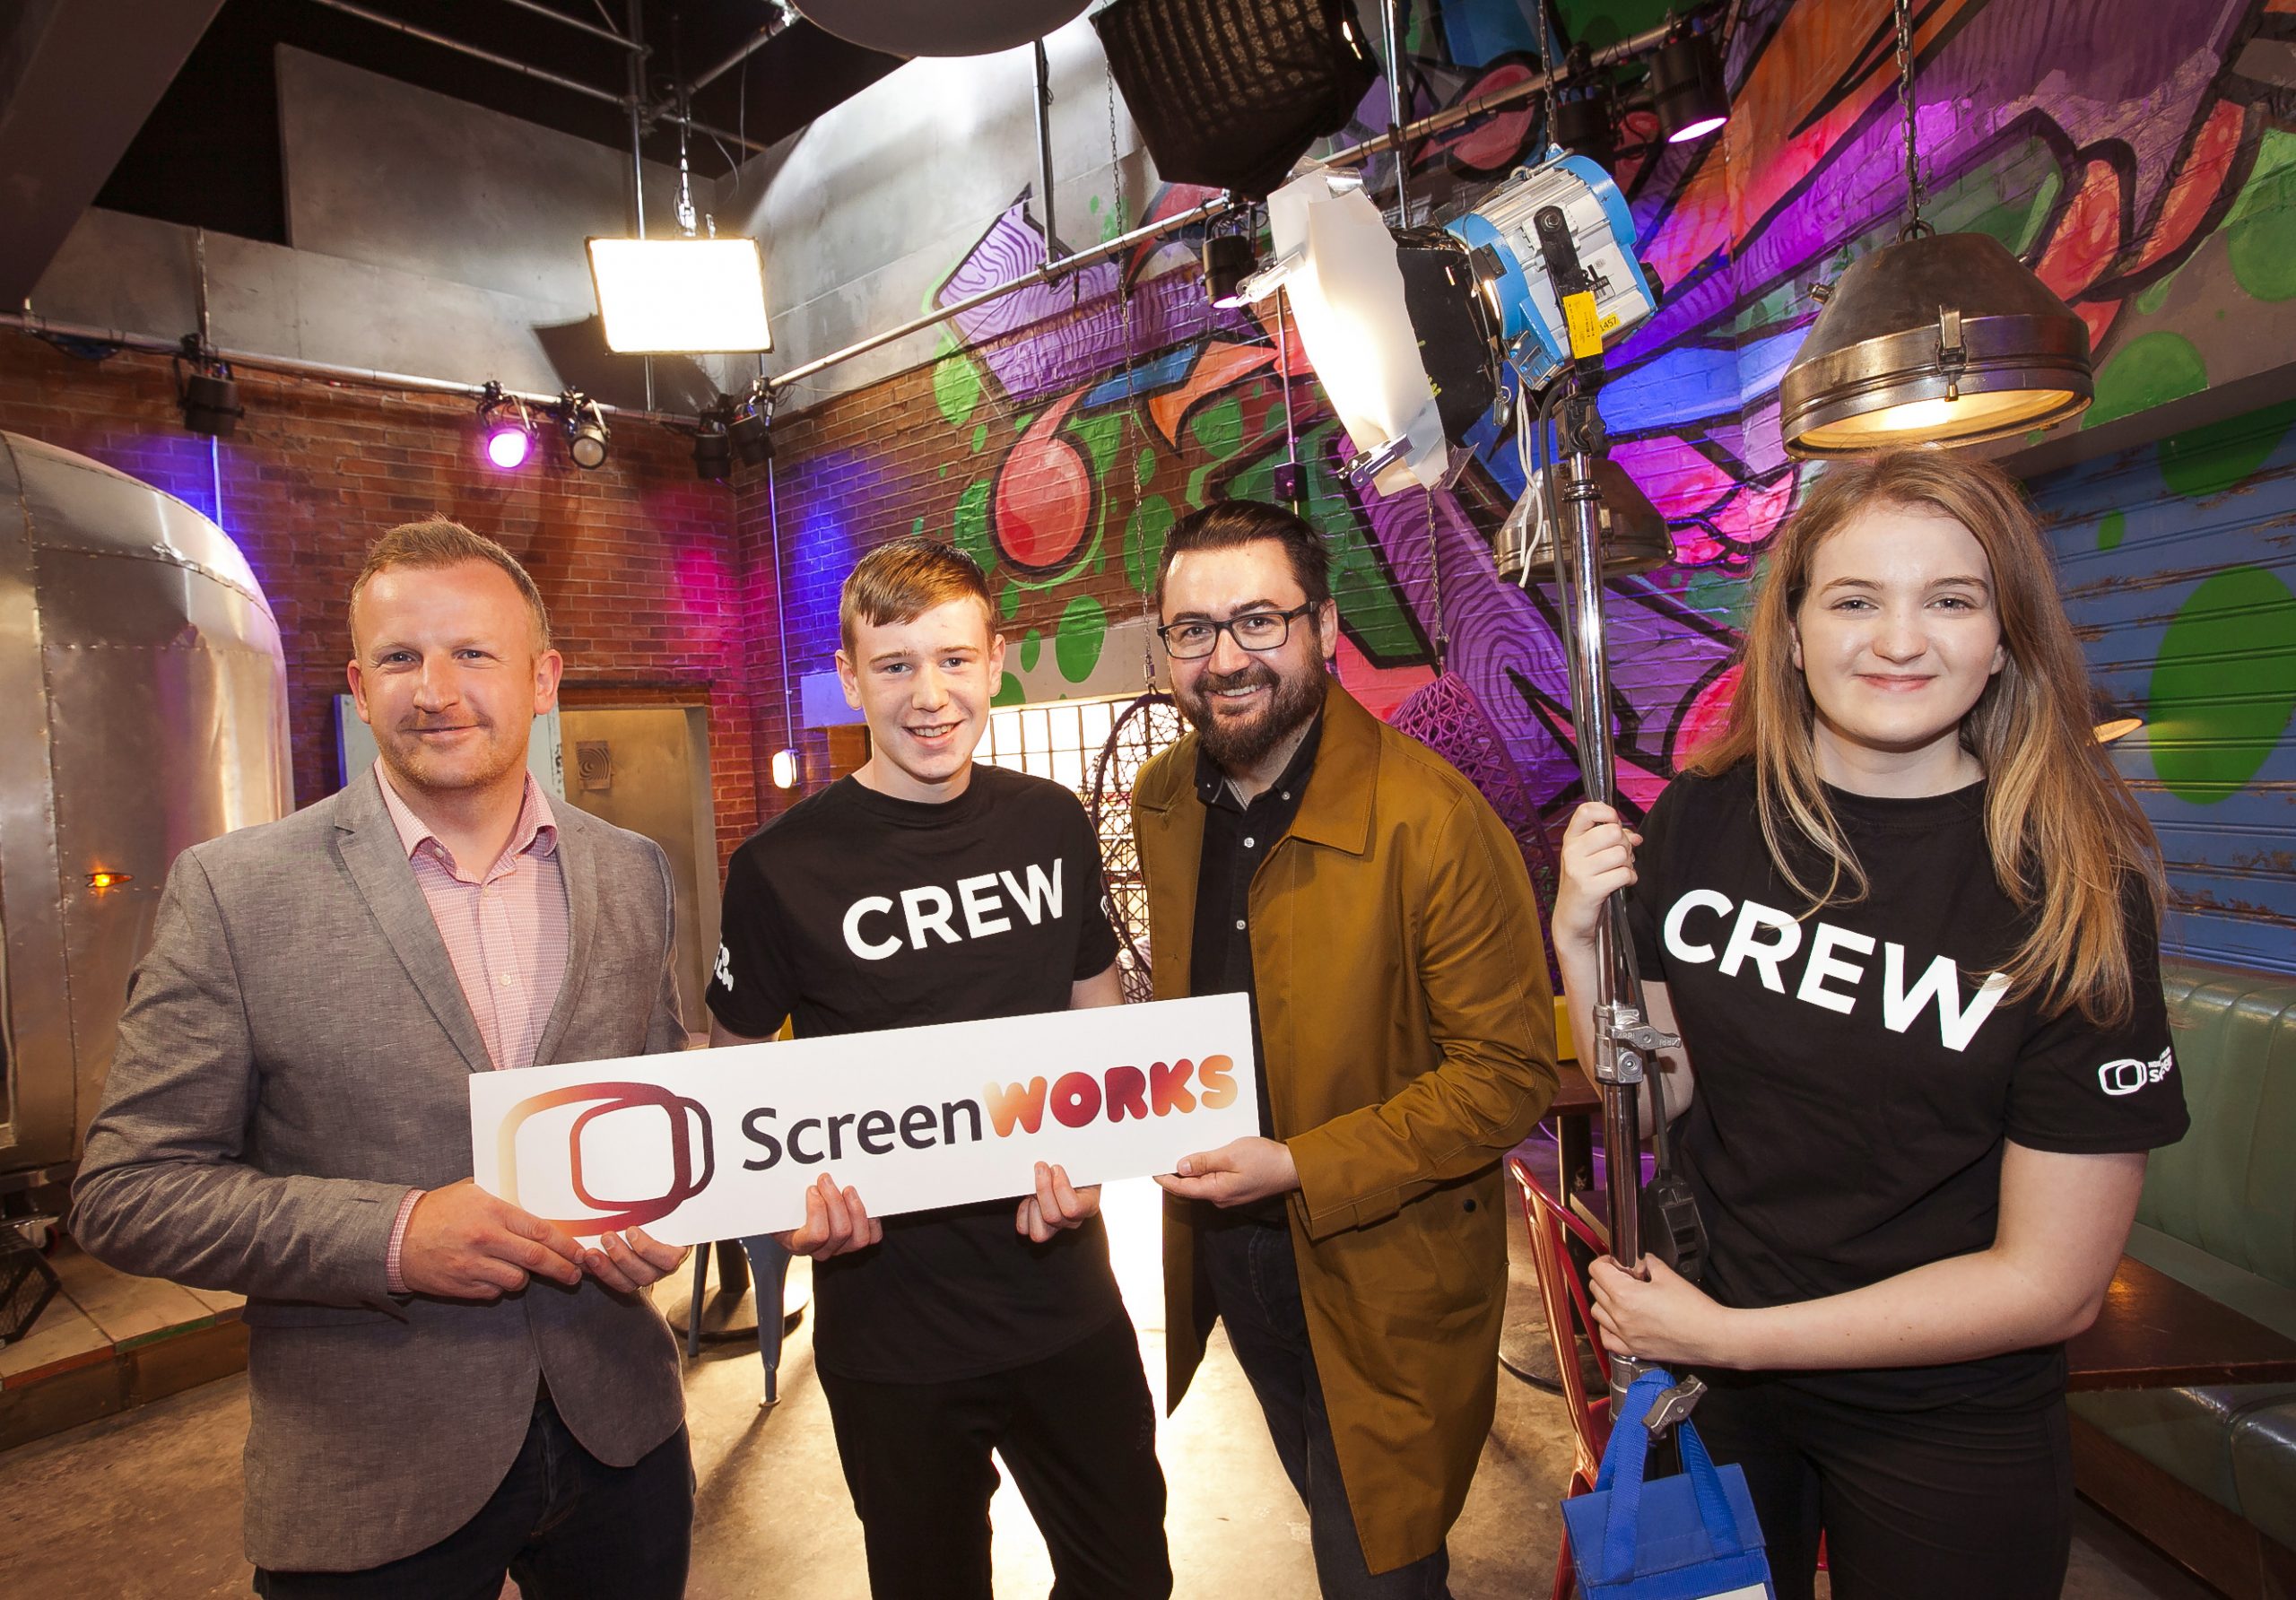 450 young people to be given training in NI screen industries